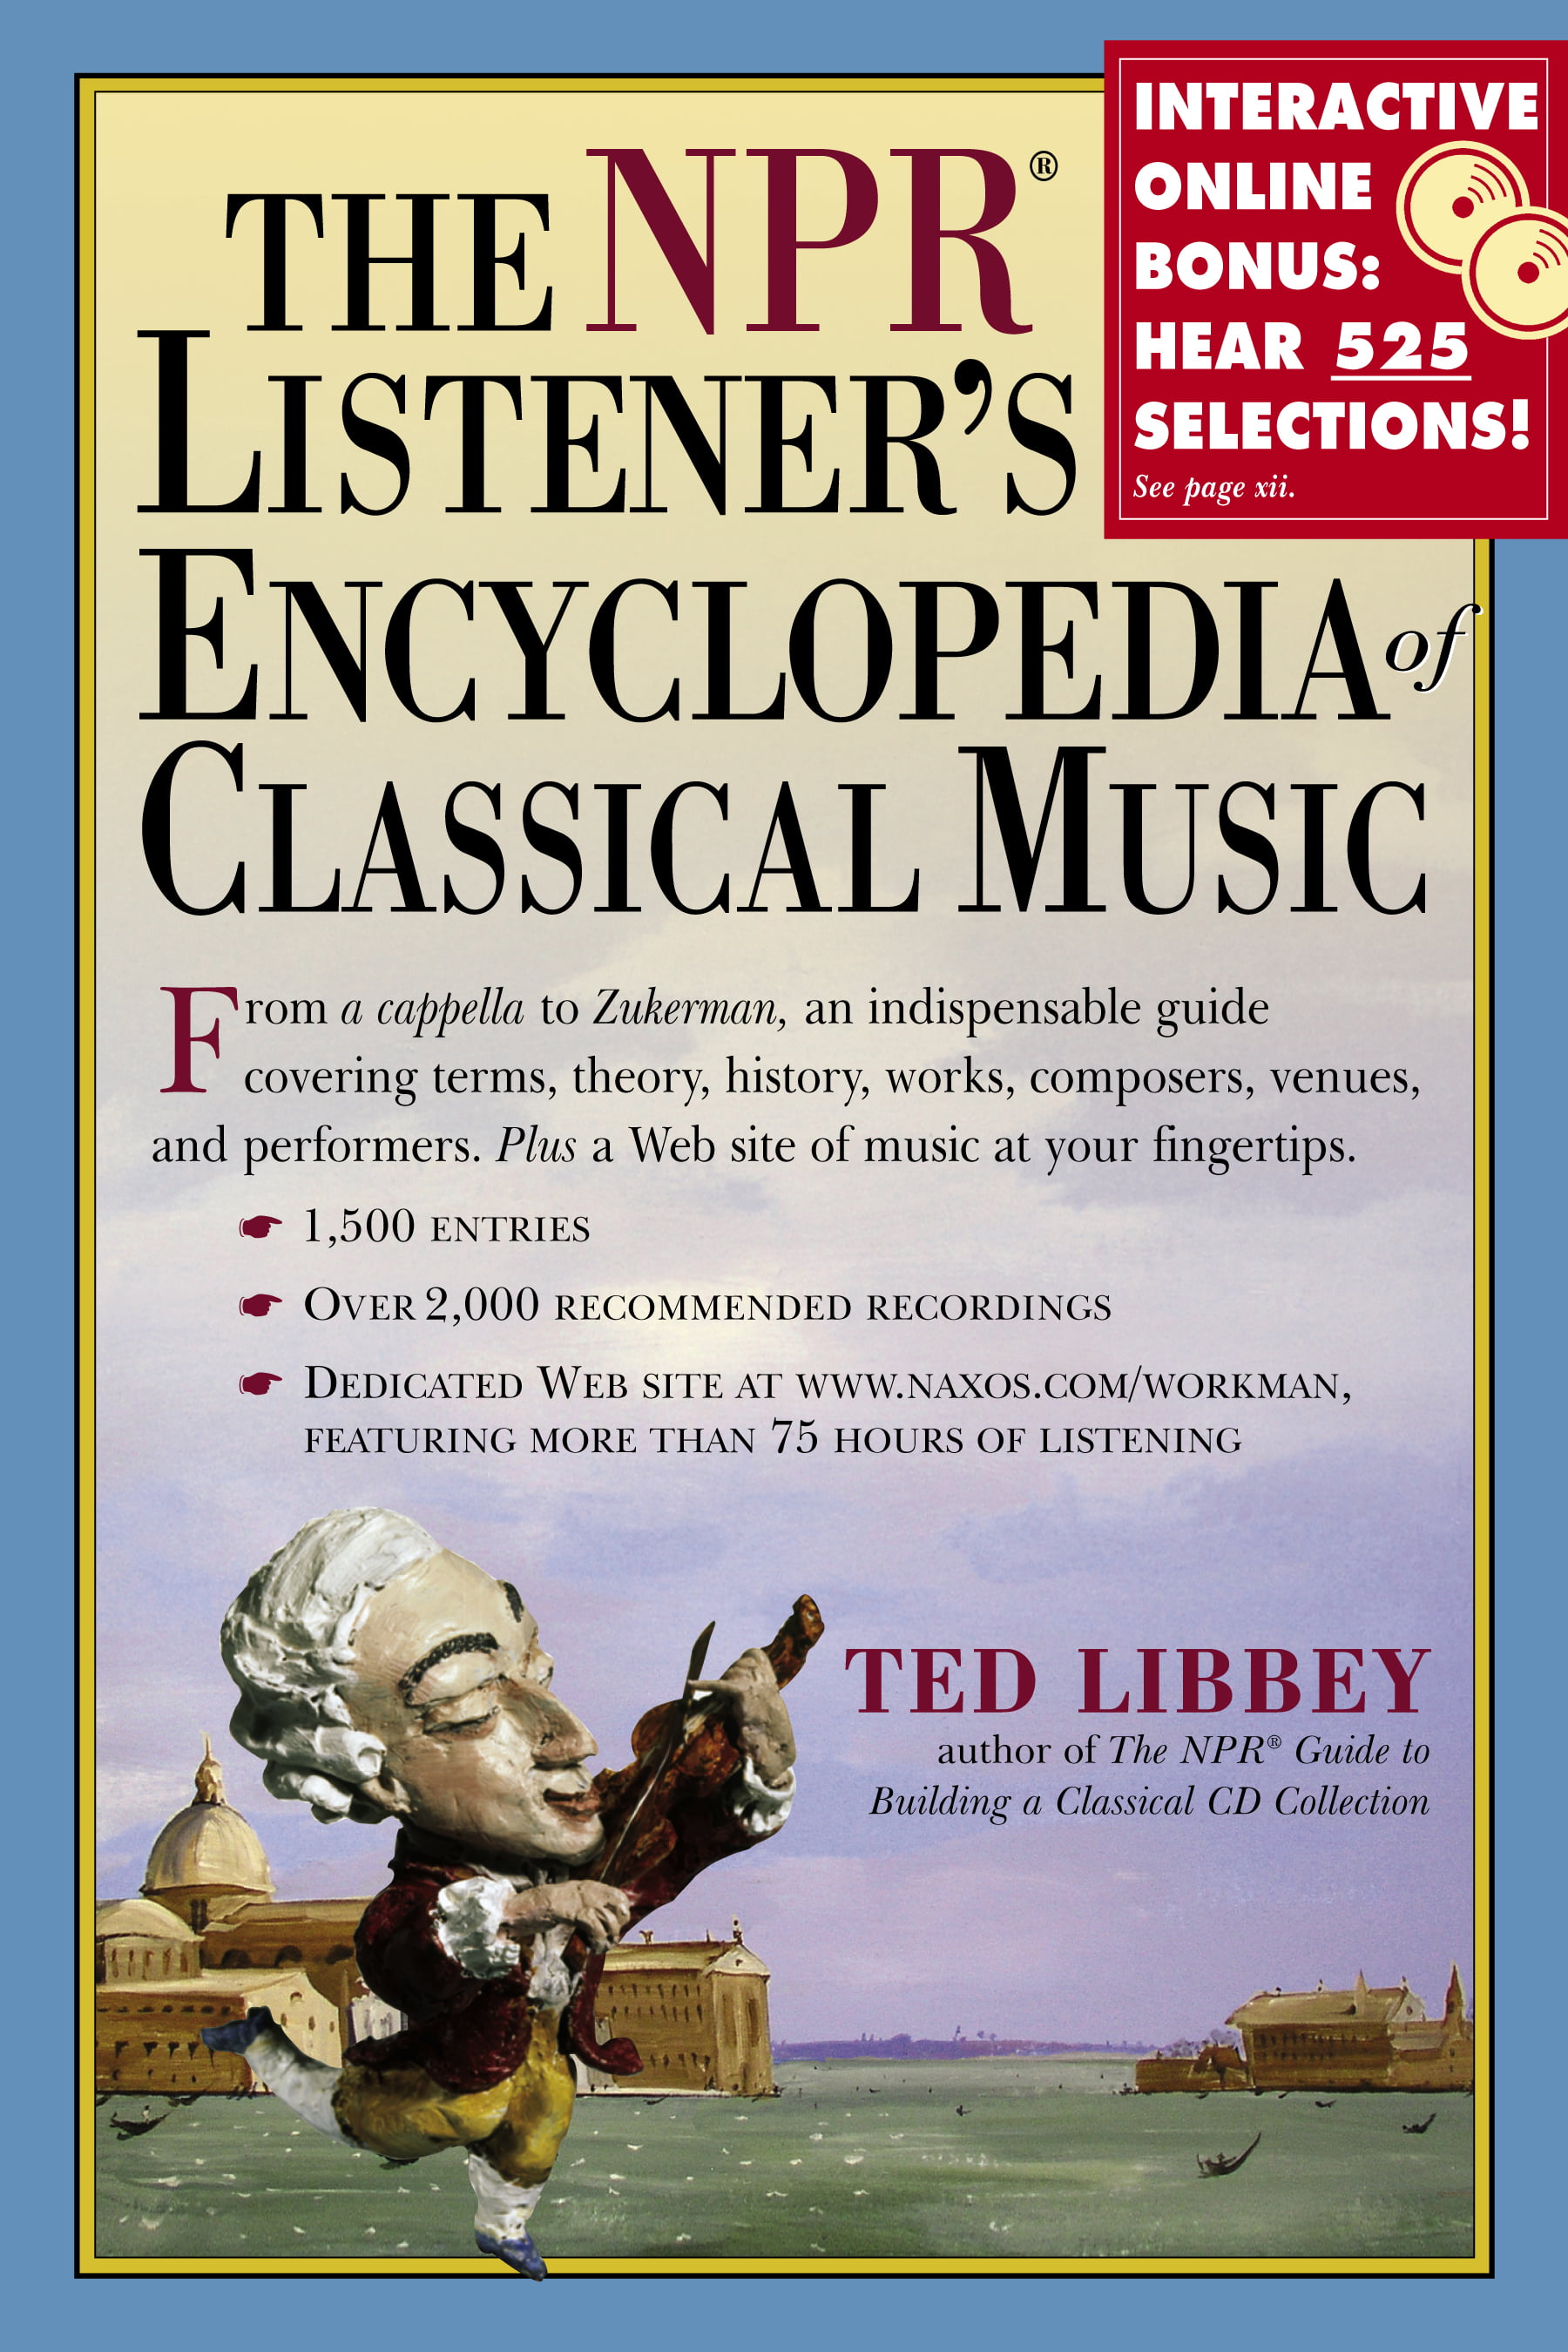 The NPR Listeners Encyclopedia of Classical Music